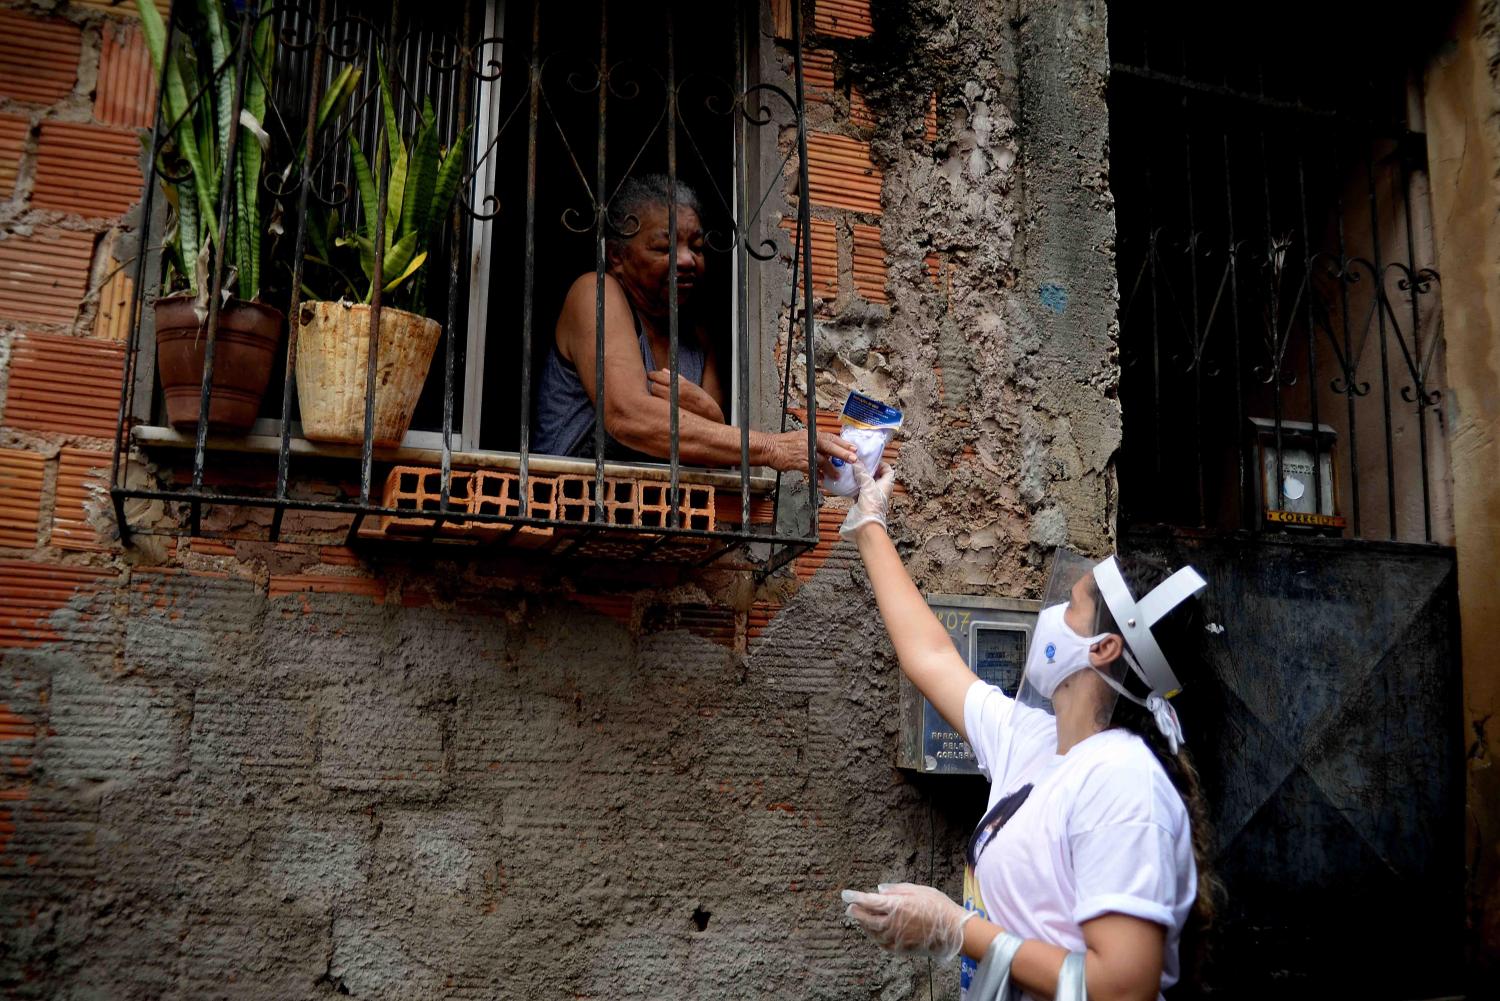 EL SALVADOR, BRAZIL-The local government continues to distribute free masks in the communities of Salvador, Brazil on May 28, 2020. Brazilian authorities recorded 418,608 cases of Covid-19, 25,935 deaths and 190,845 recovered in the country.